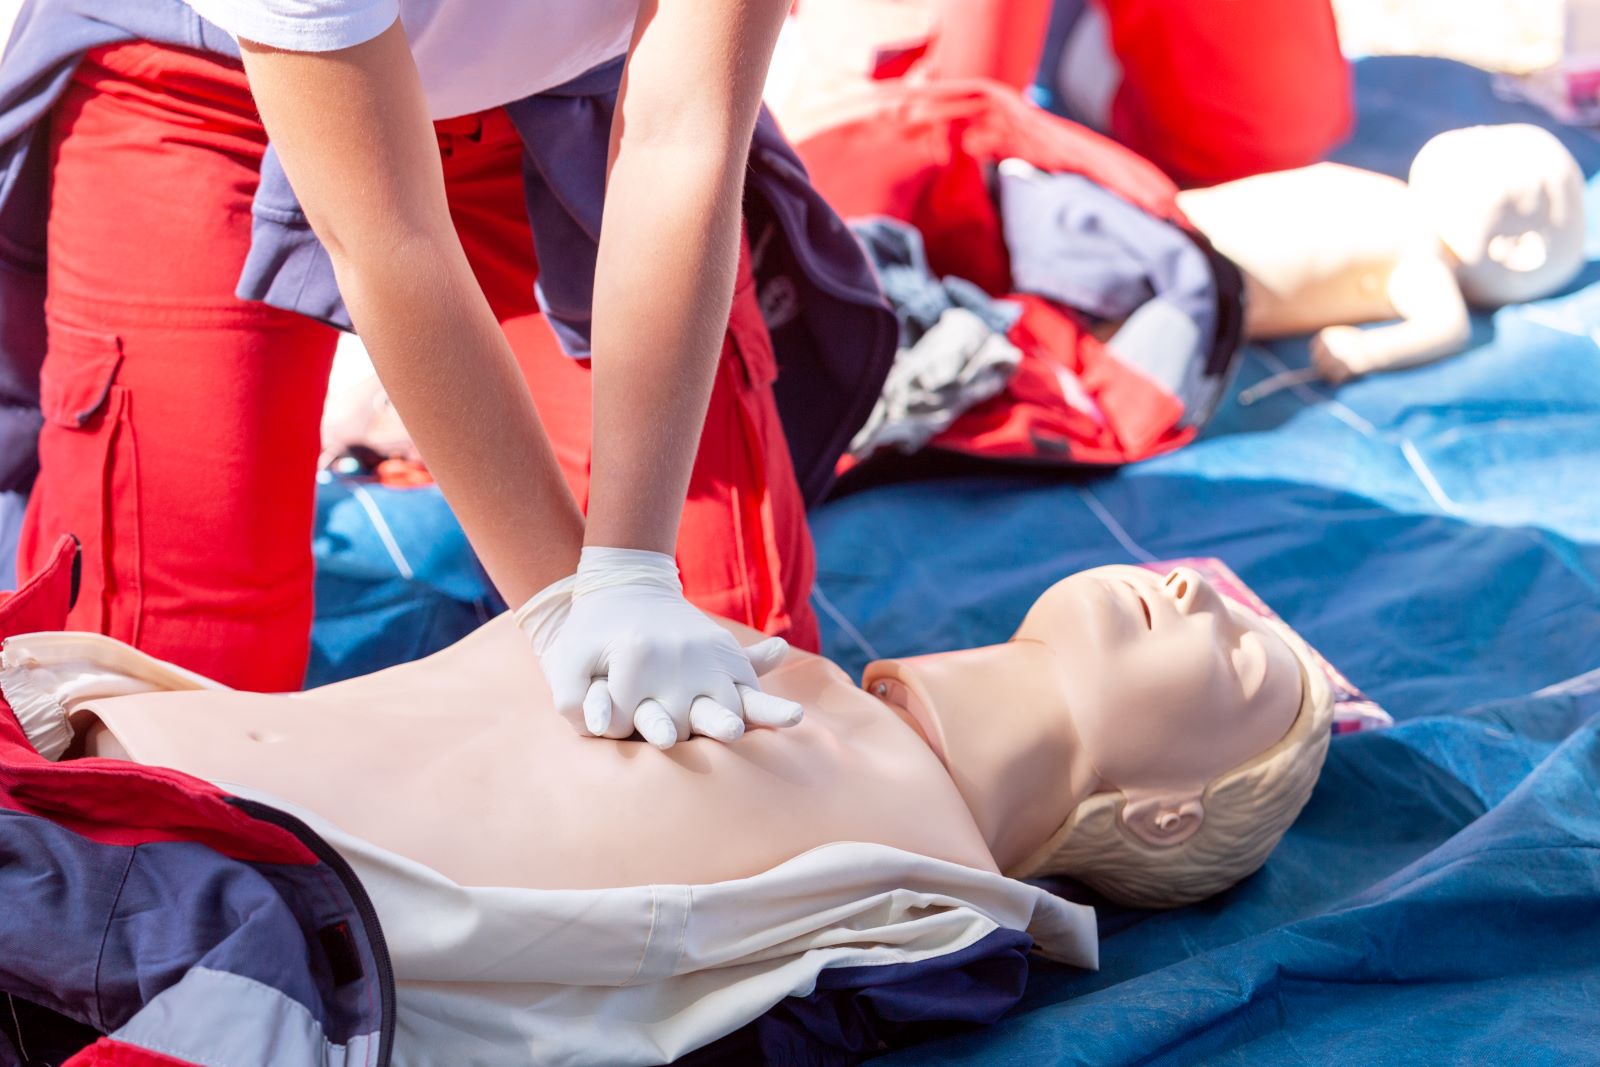 Spring CPR Class Offered in Torrington